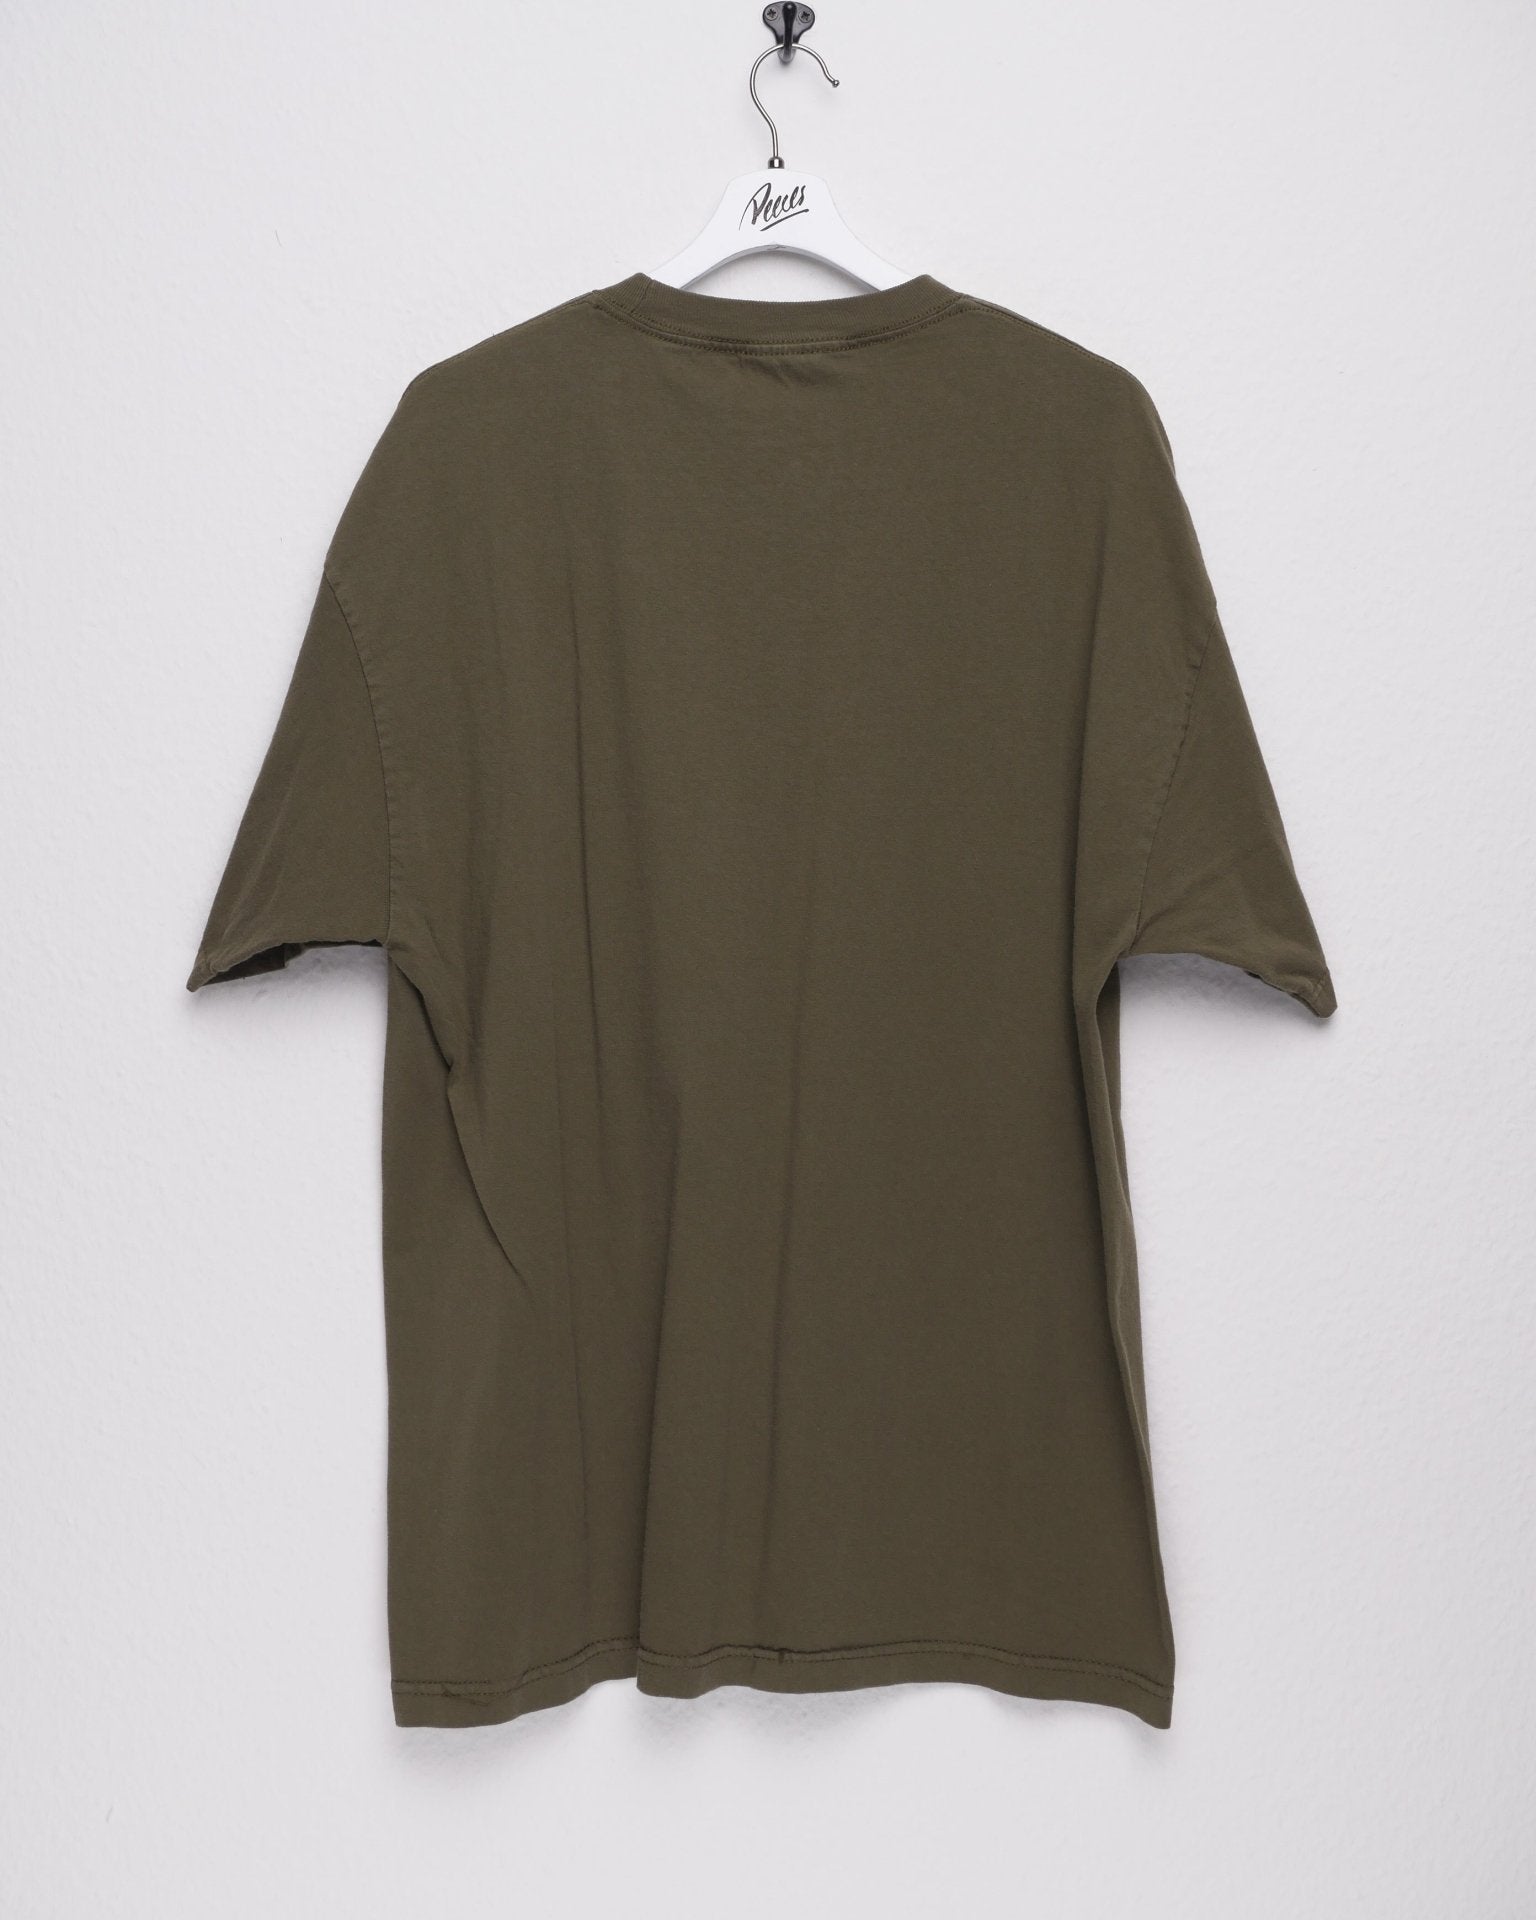 'Oscar the Crouch' printed Graphic olive Shirt - Peeces